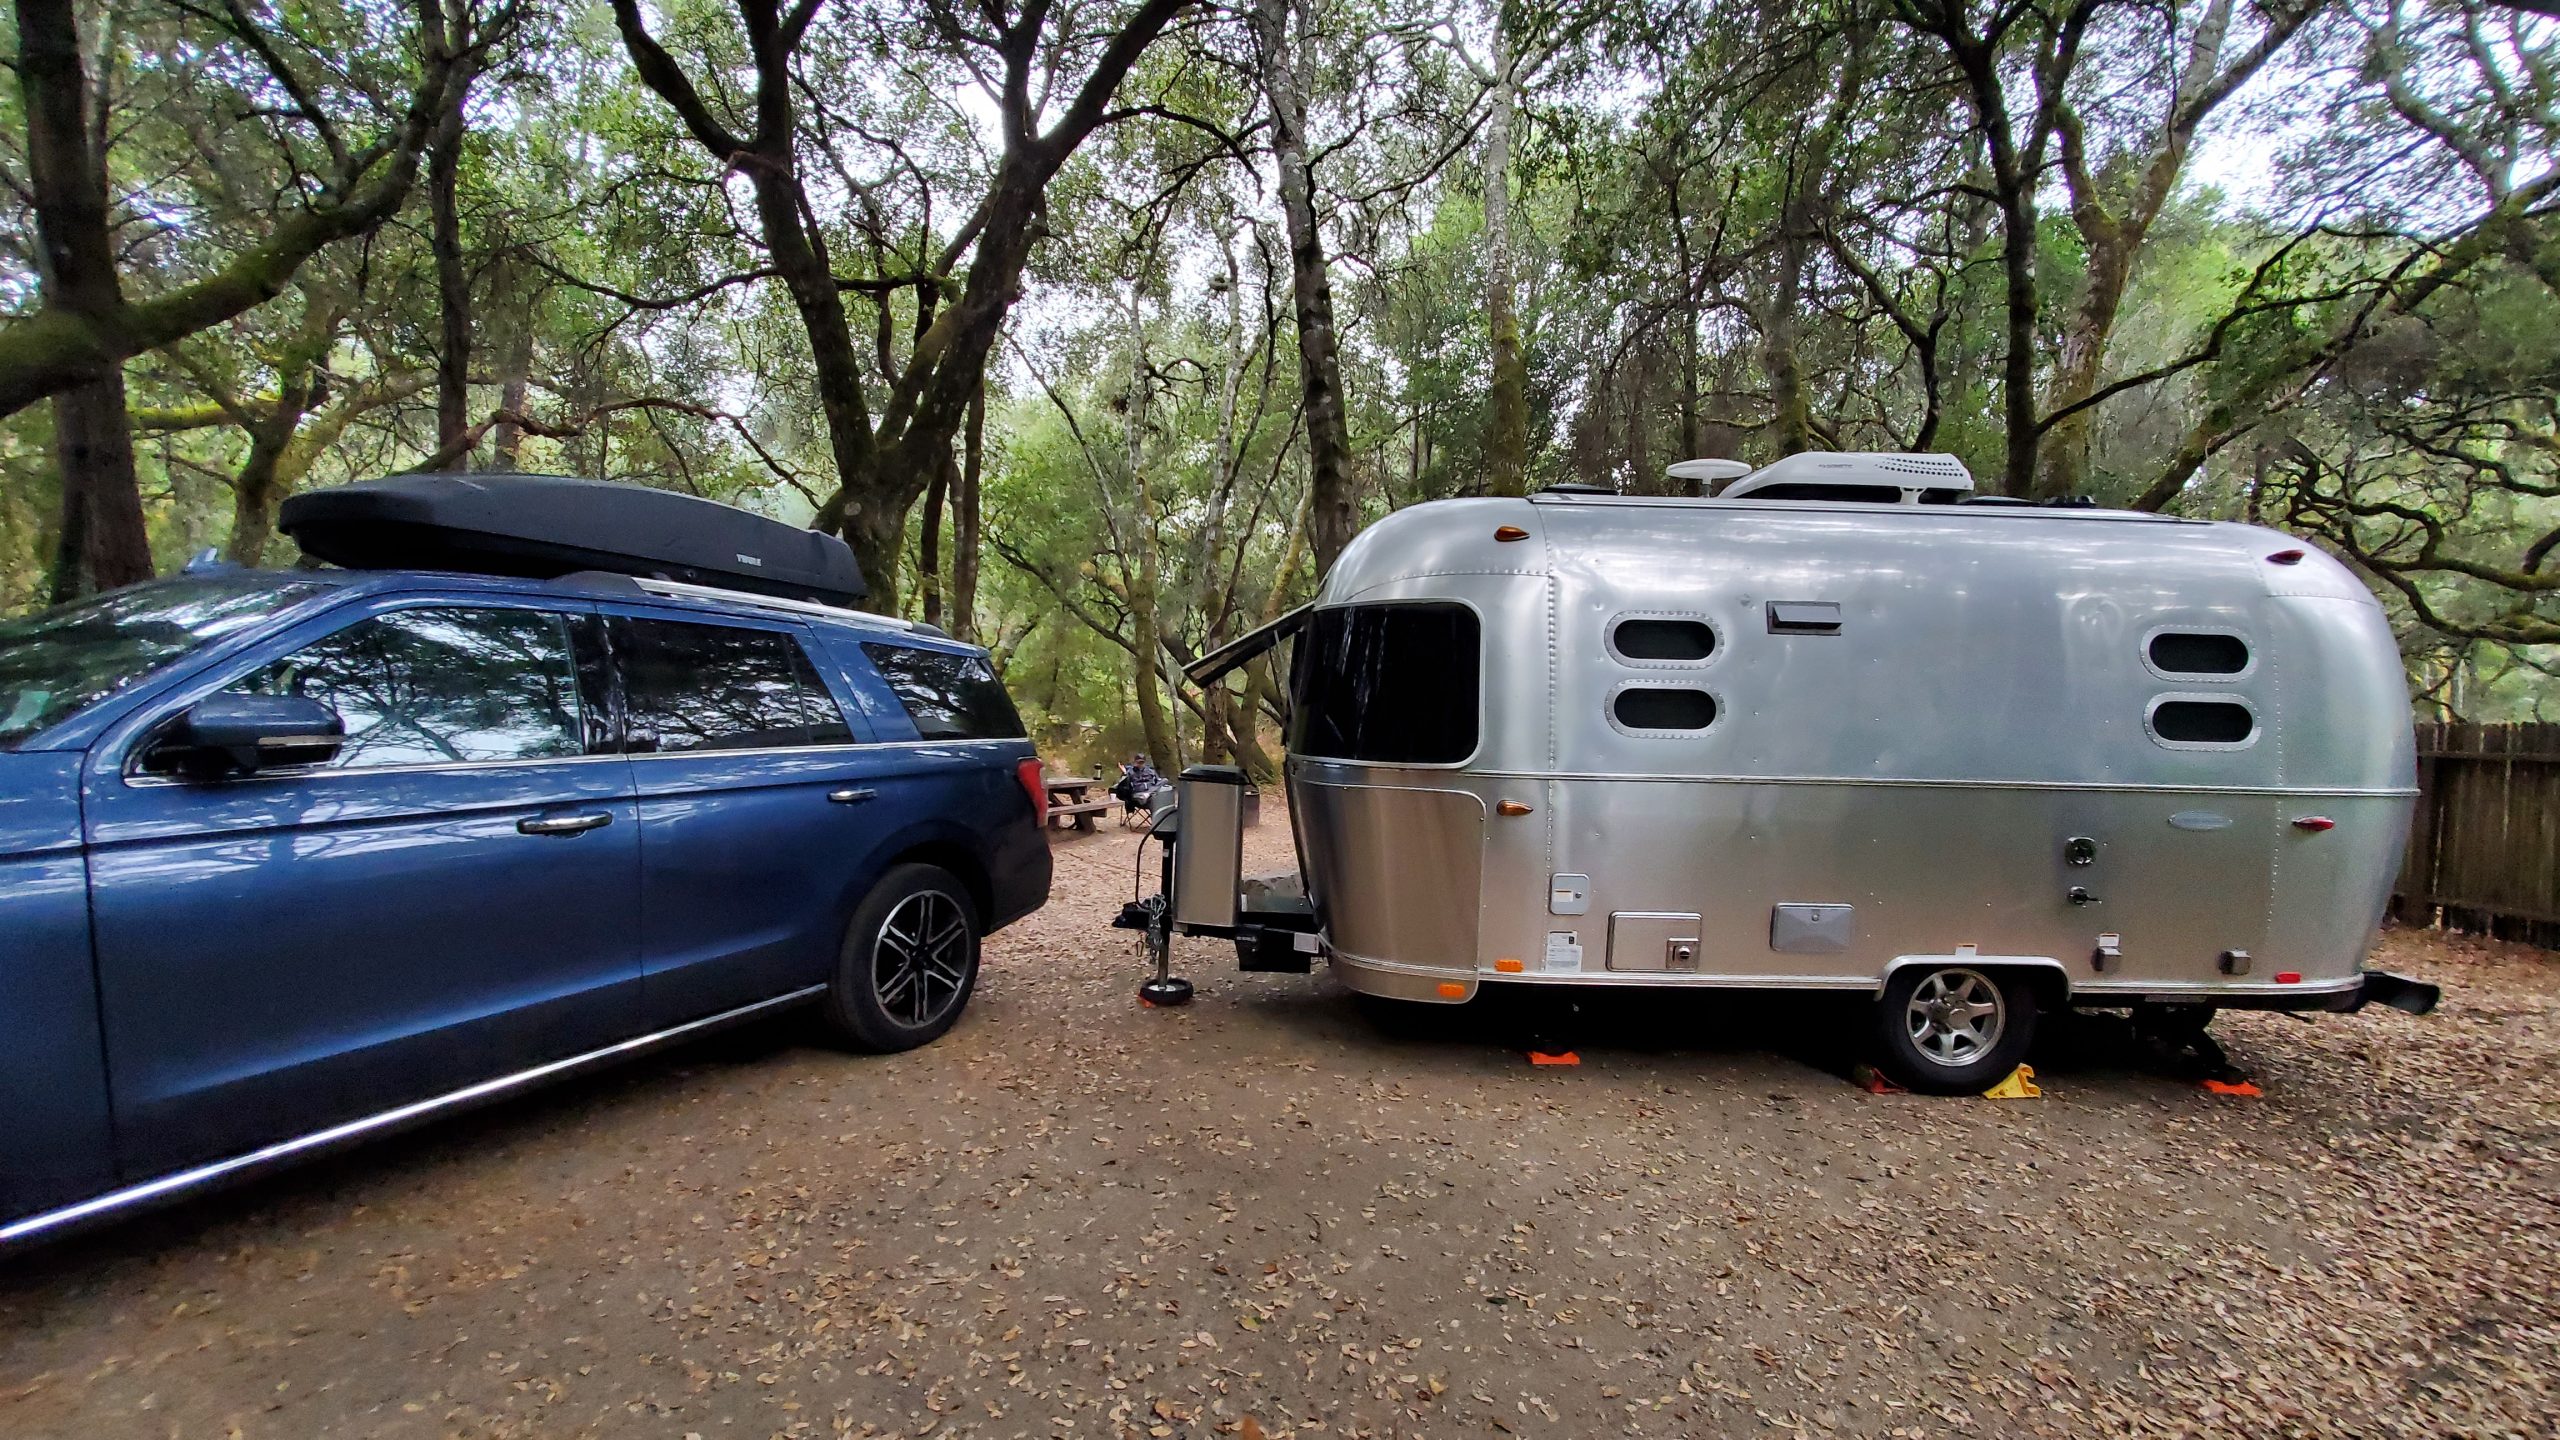 Picture of a blue Ford Expedition and a 19 foot silver Airstream in a campground.